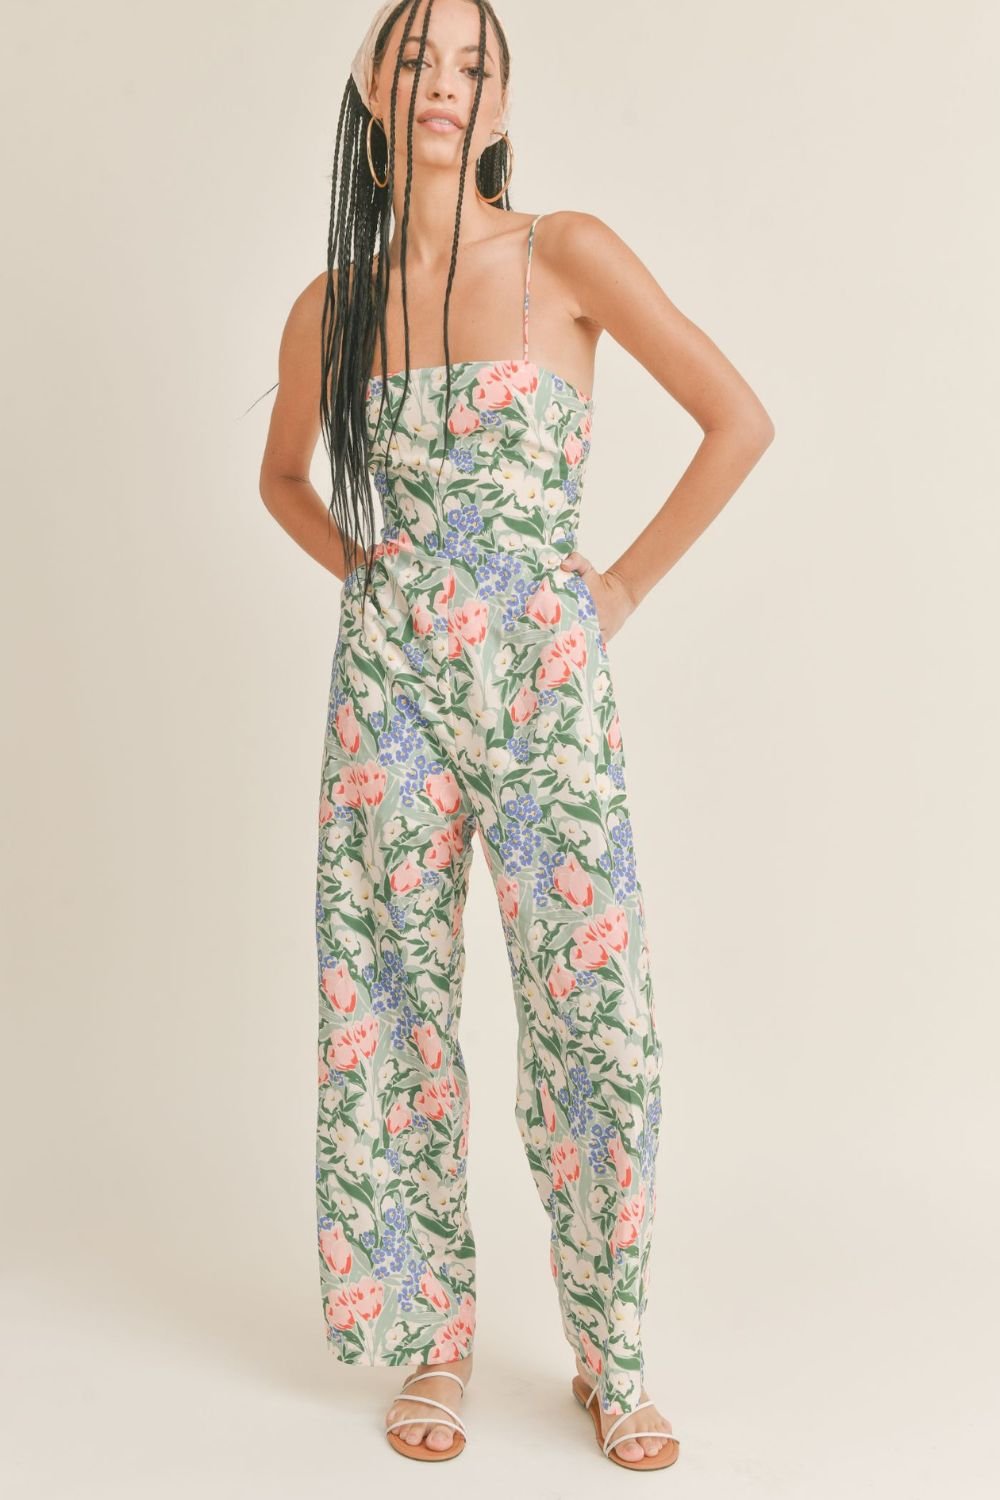 Sage The Label | Women's Floral Jumpsuit | Green Multi - Women's Jumpsuit - Blooming Daily